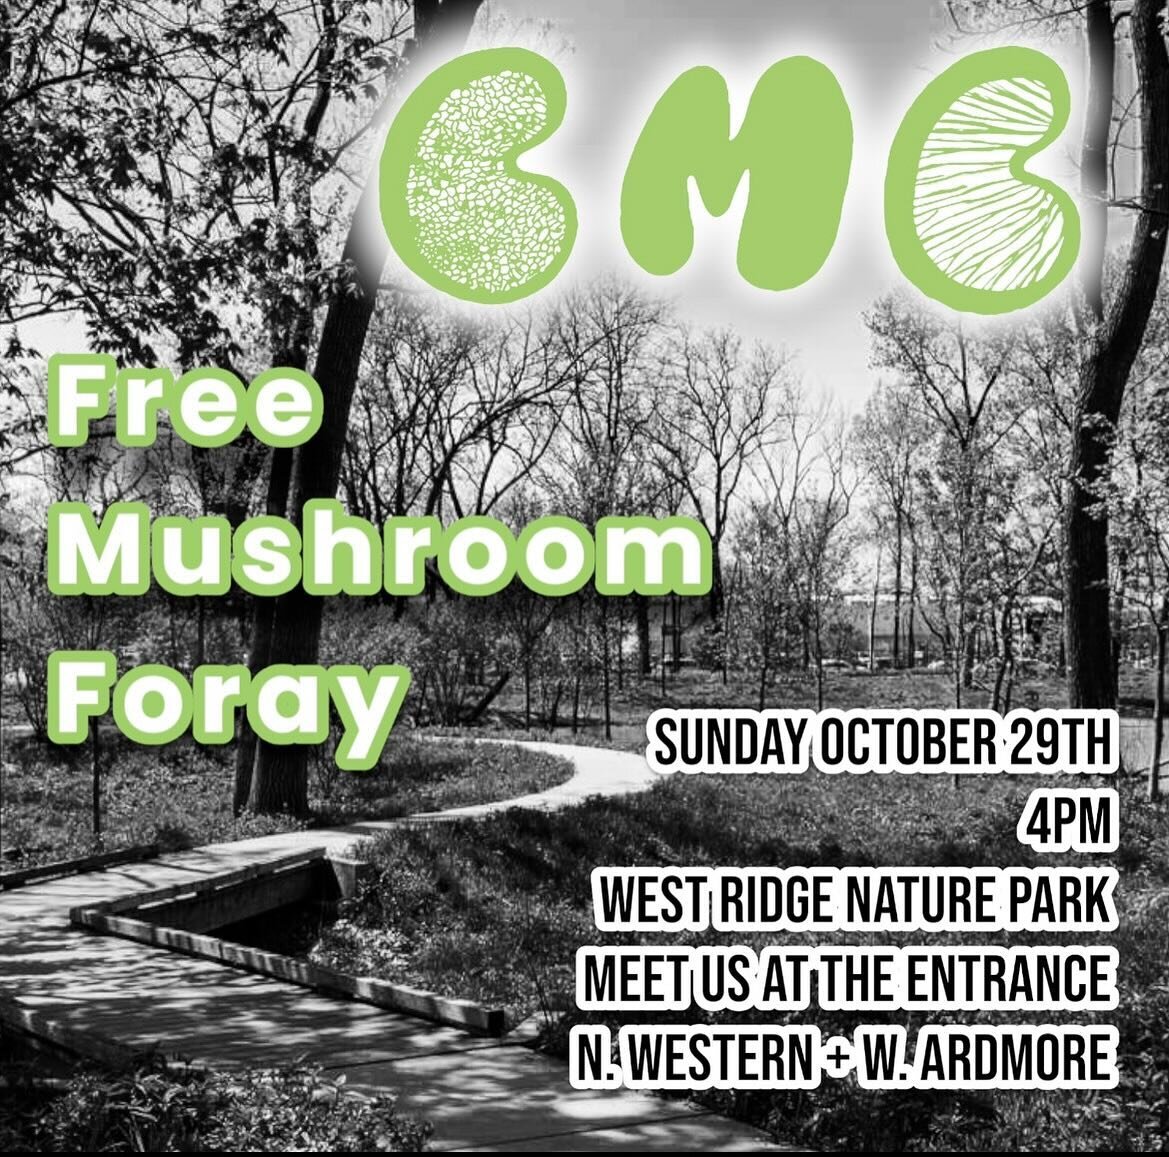 October 29th, 2023 at 4pm!

Meet us at the entrance of West Ridge Nature Preserve!

It may be a bit chilly, so bring layers if needed! Also, feel free to bring a bag to pick up garbage along the way!

Please keep in mind that we will be stopping freq